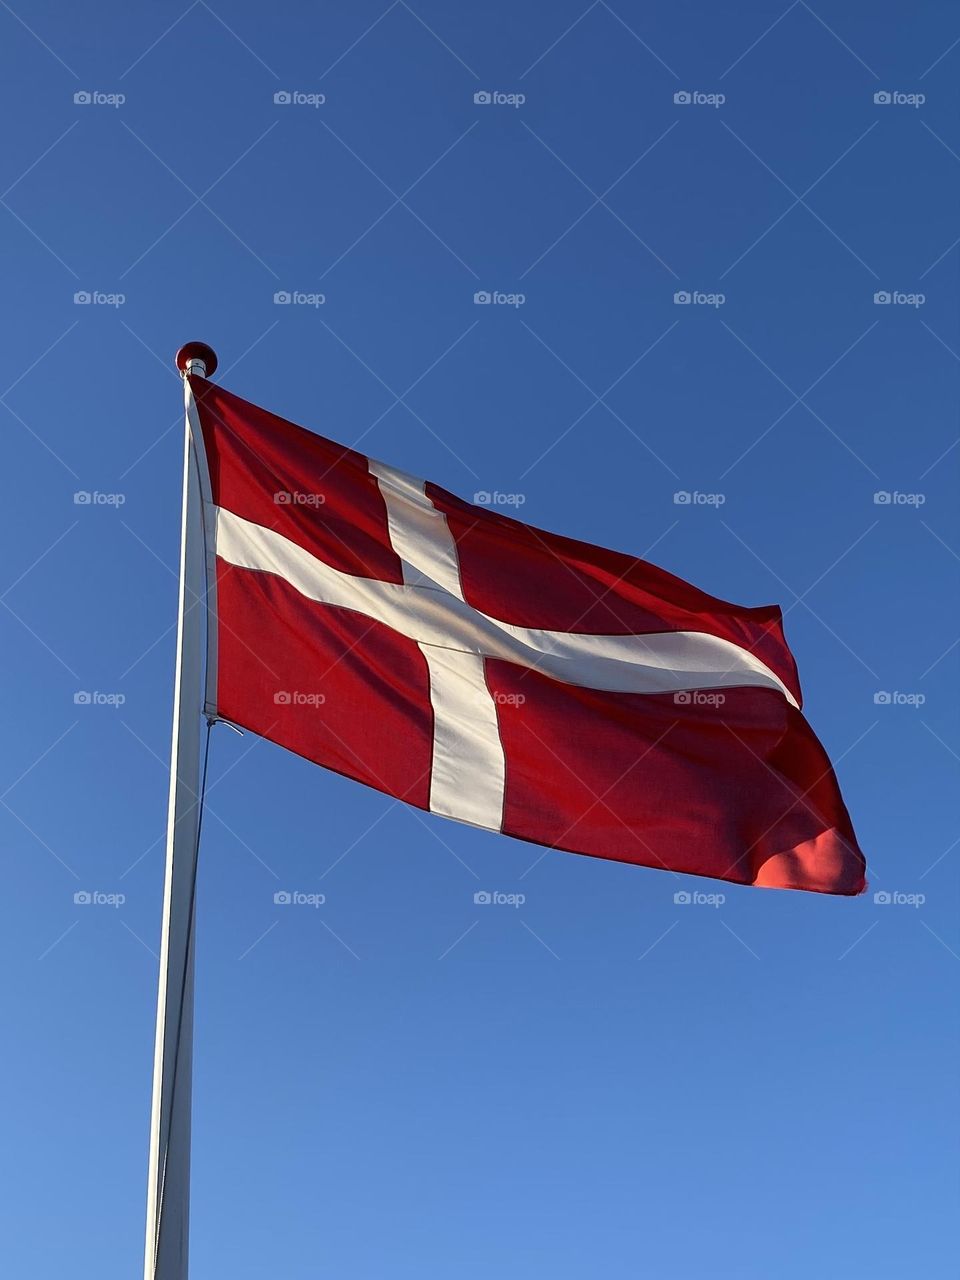 flag of Denmark in the wind and beautiful blue sky 